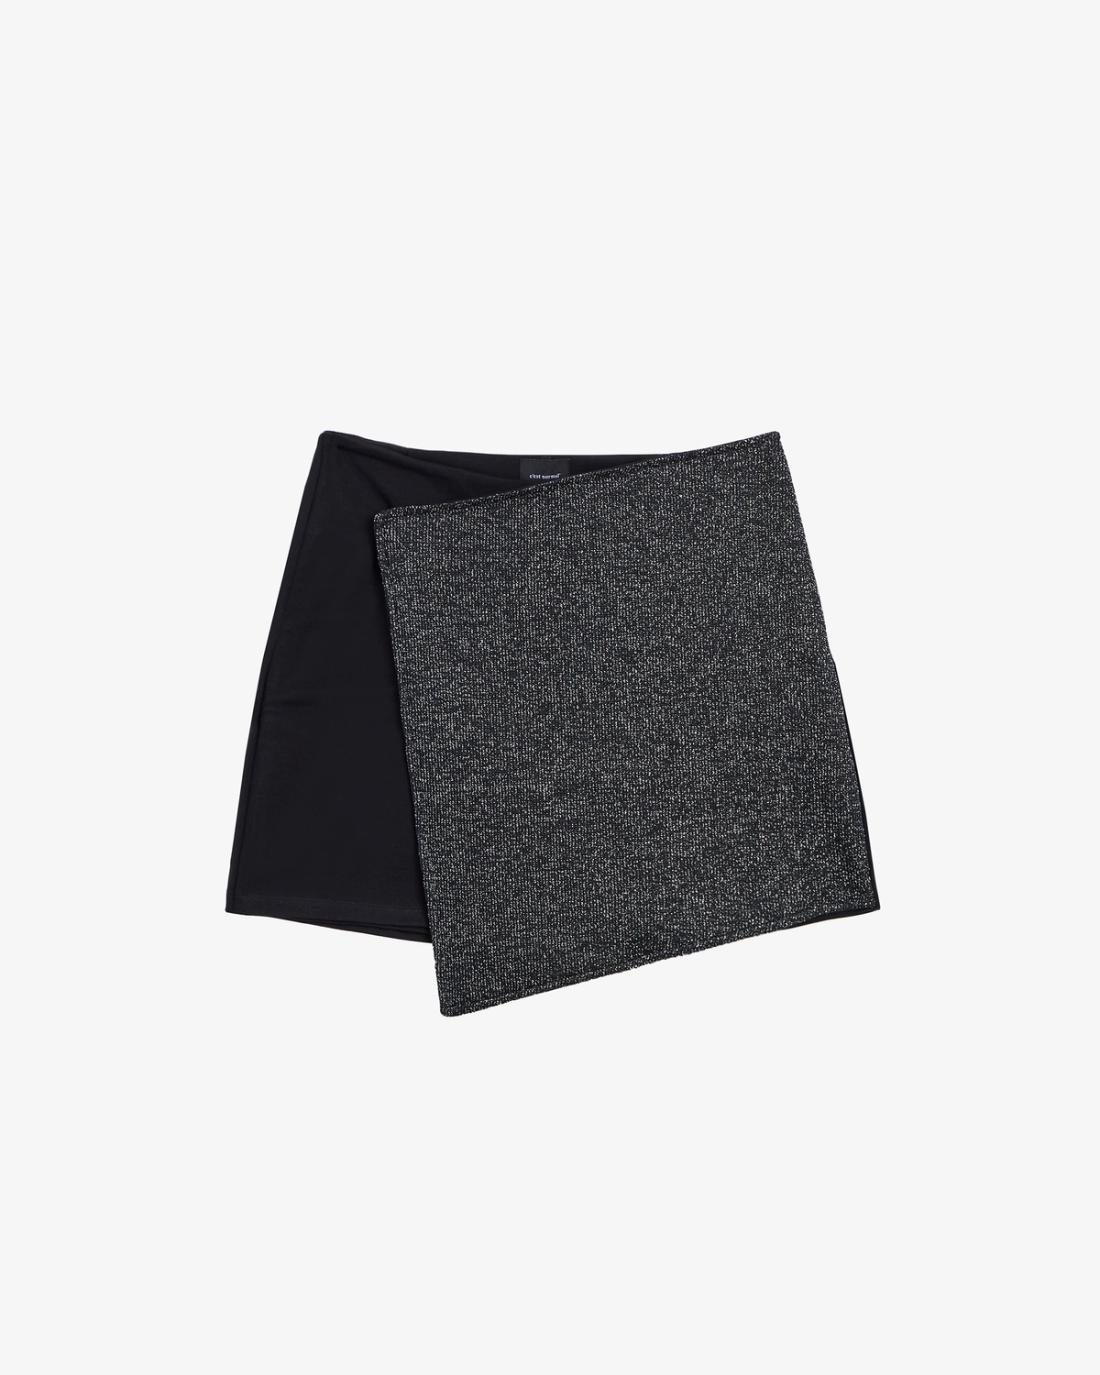 The Party Skort